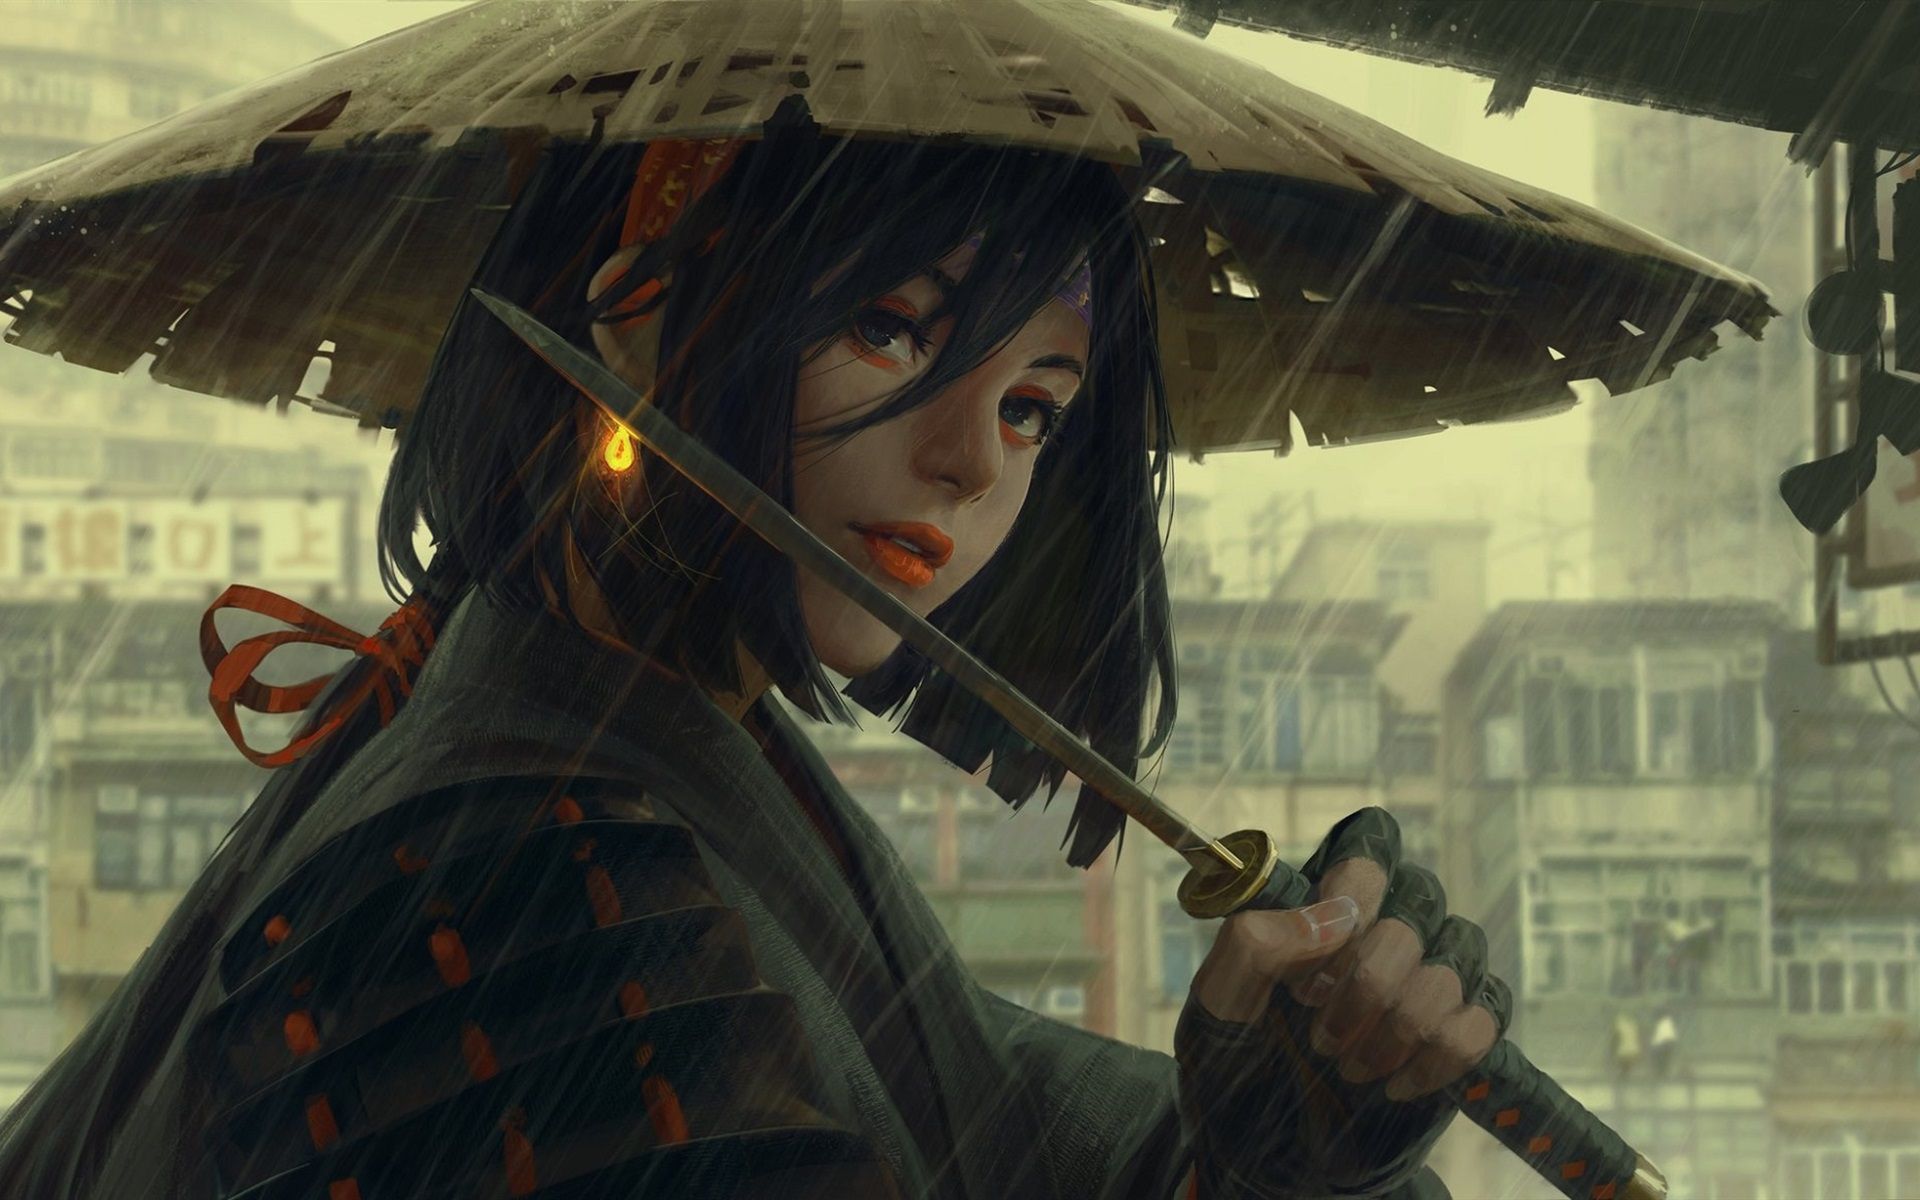 Japanese Girl, Hat, Rain, Sword, Art Painting 640x1136 IPhone 5 5S 5C SE Wallpaper, Background, Picture, Image